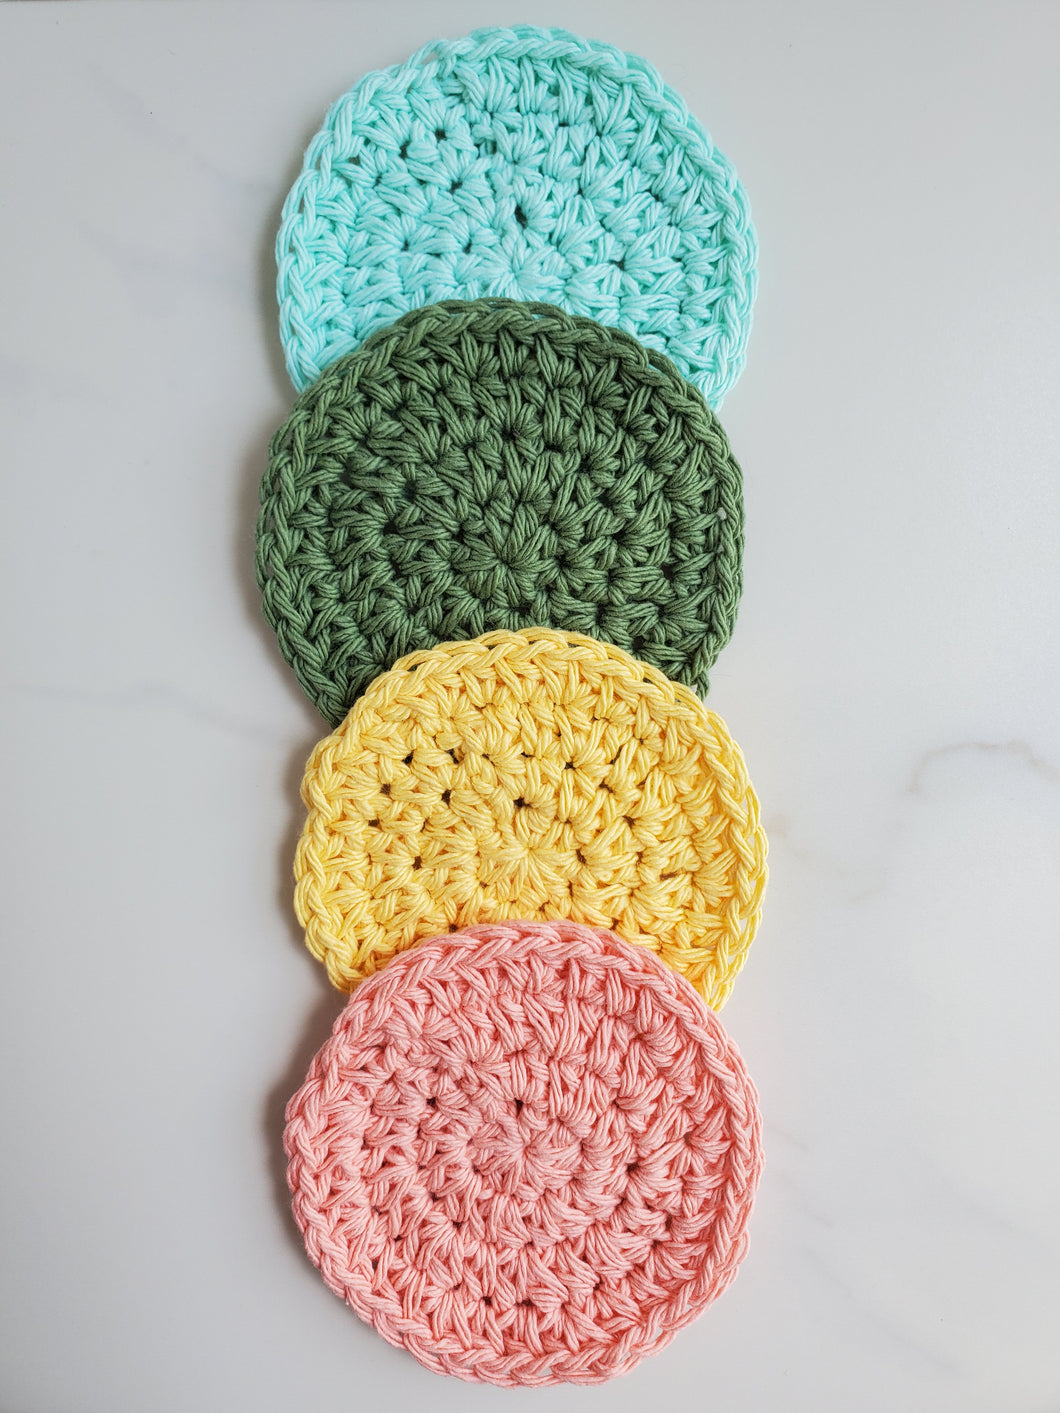 Rainbow set of makeup remover pads